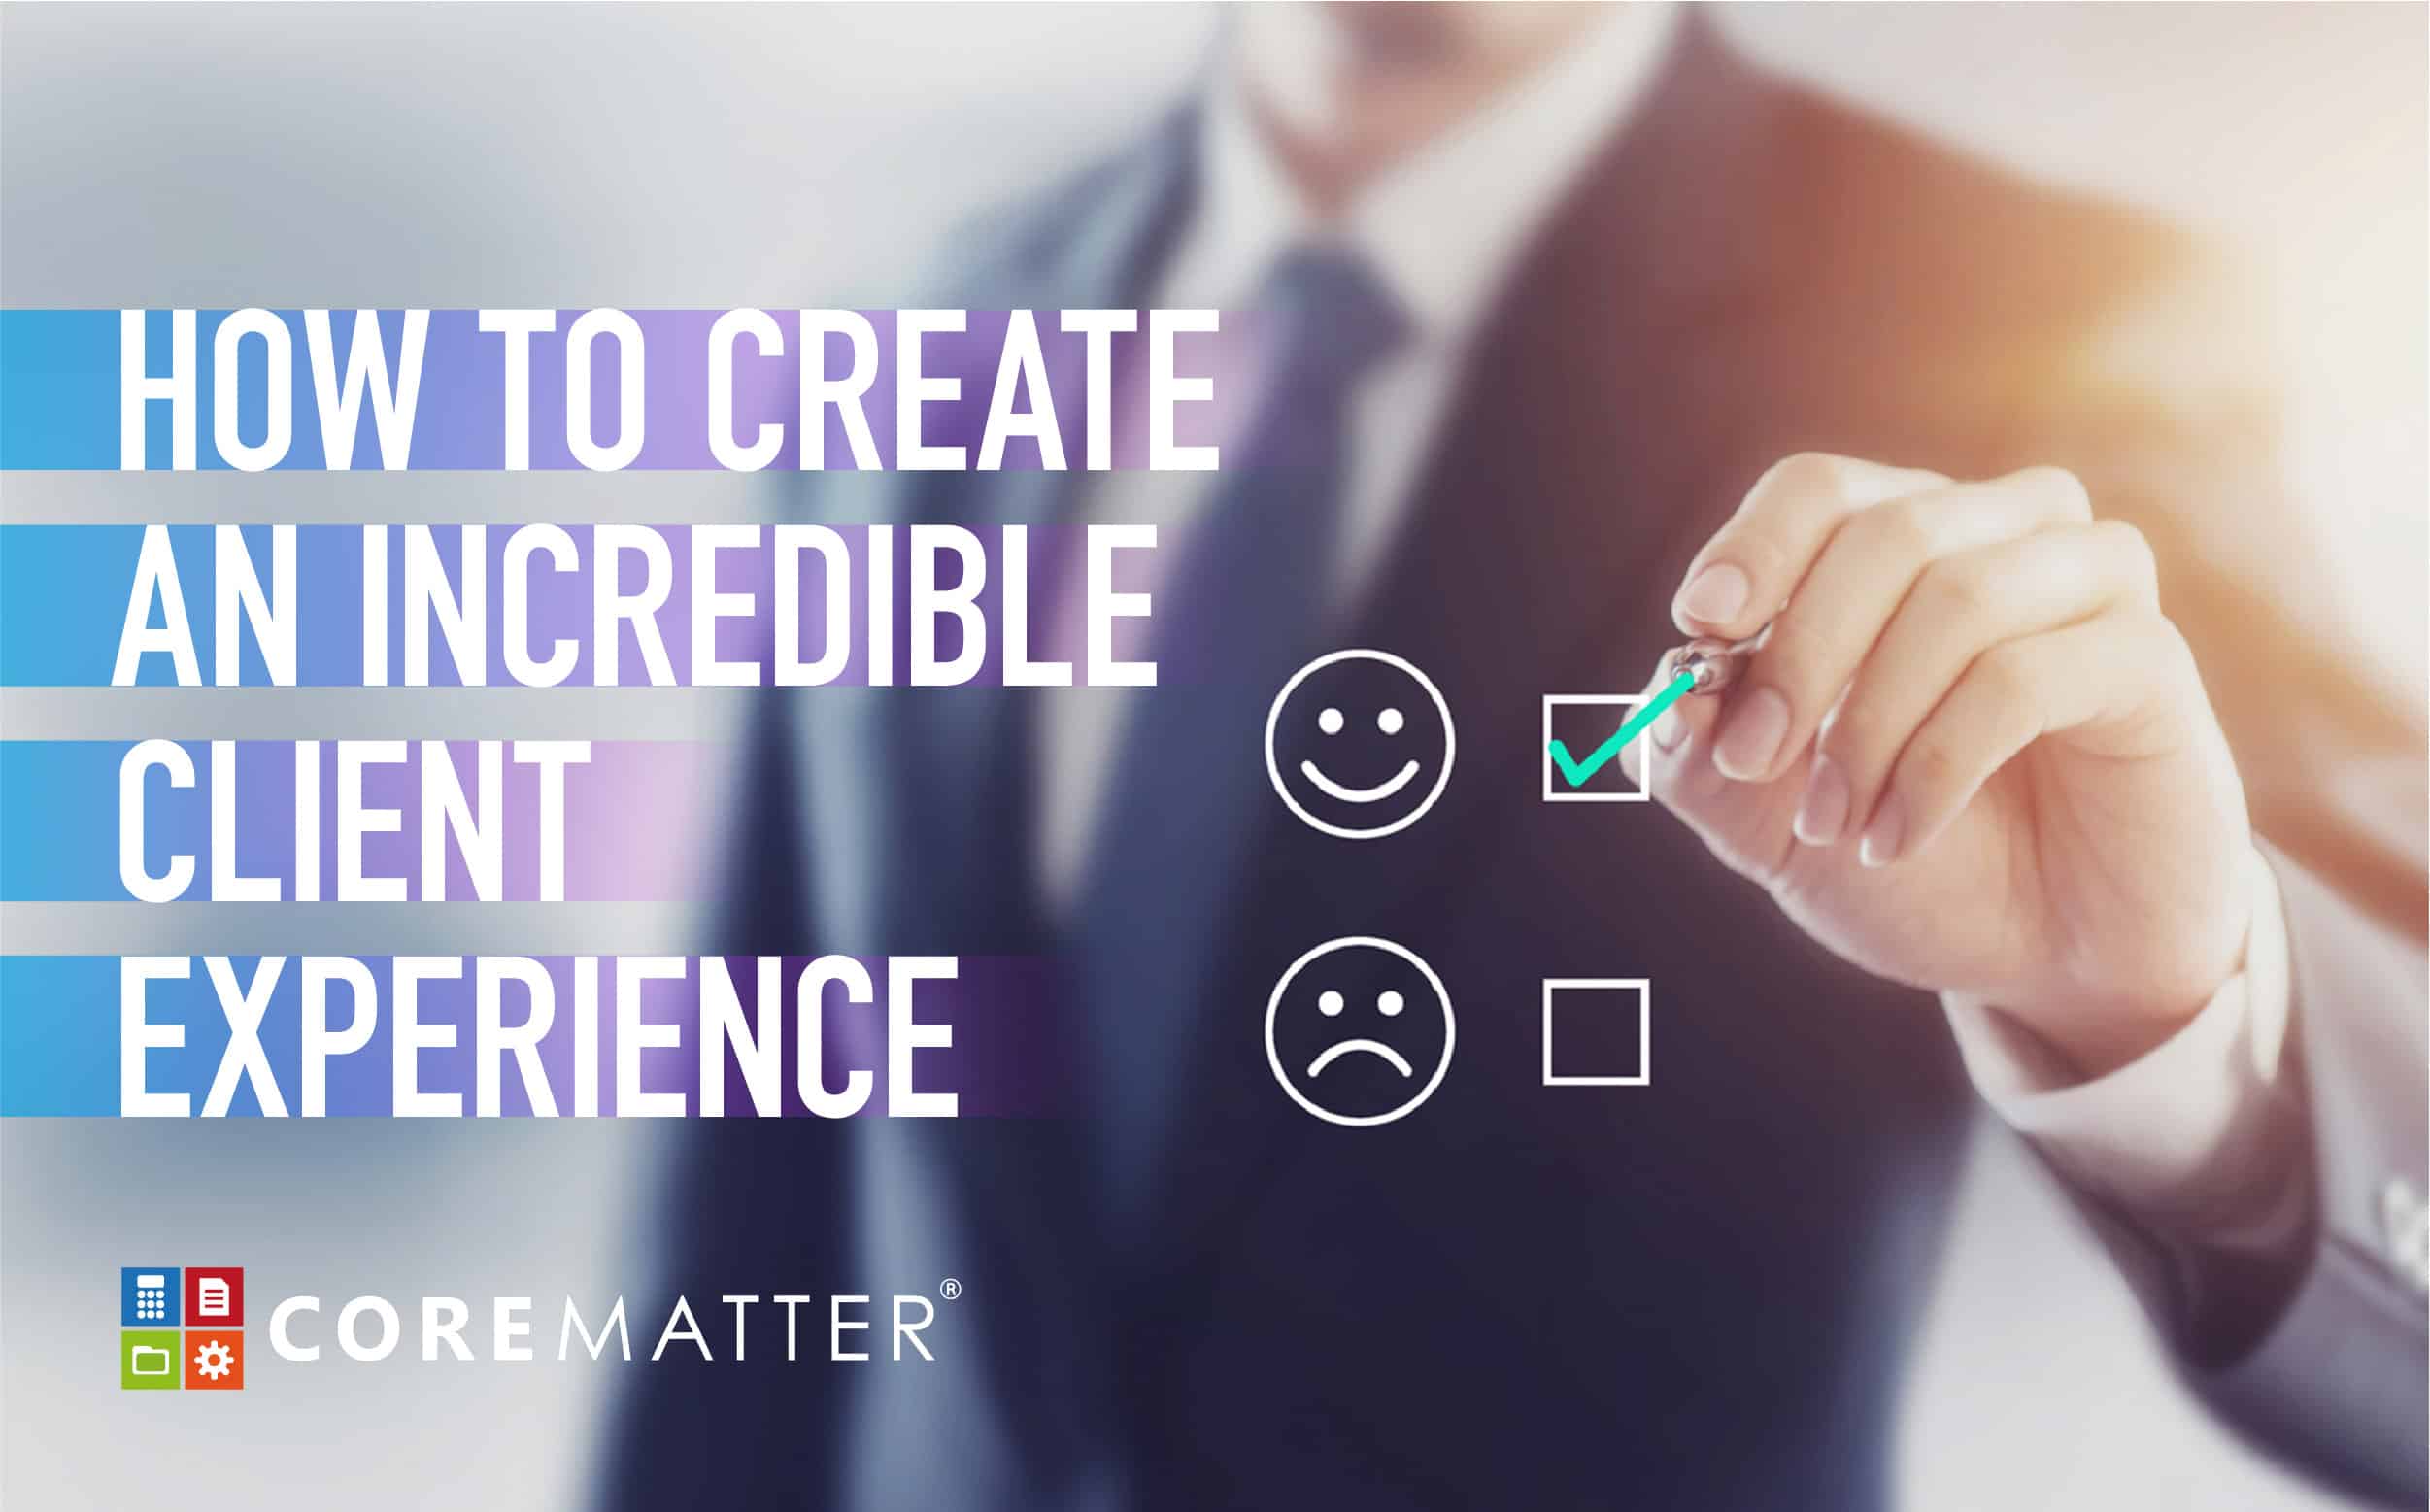 How to Create an Incredible Client Experience